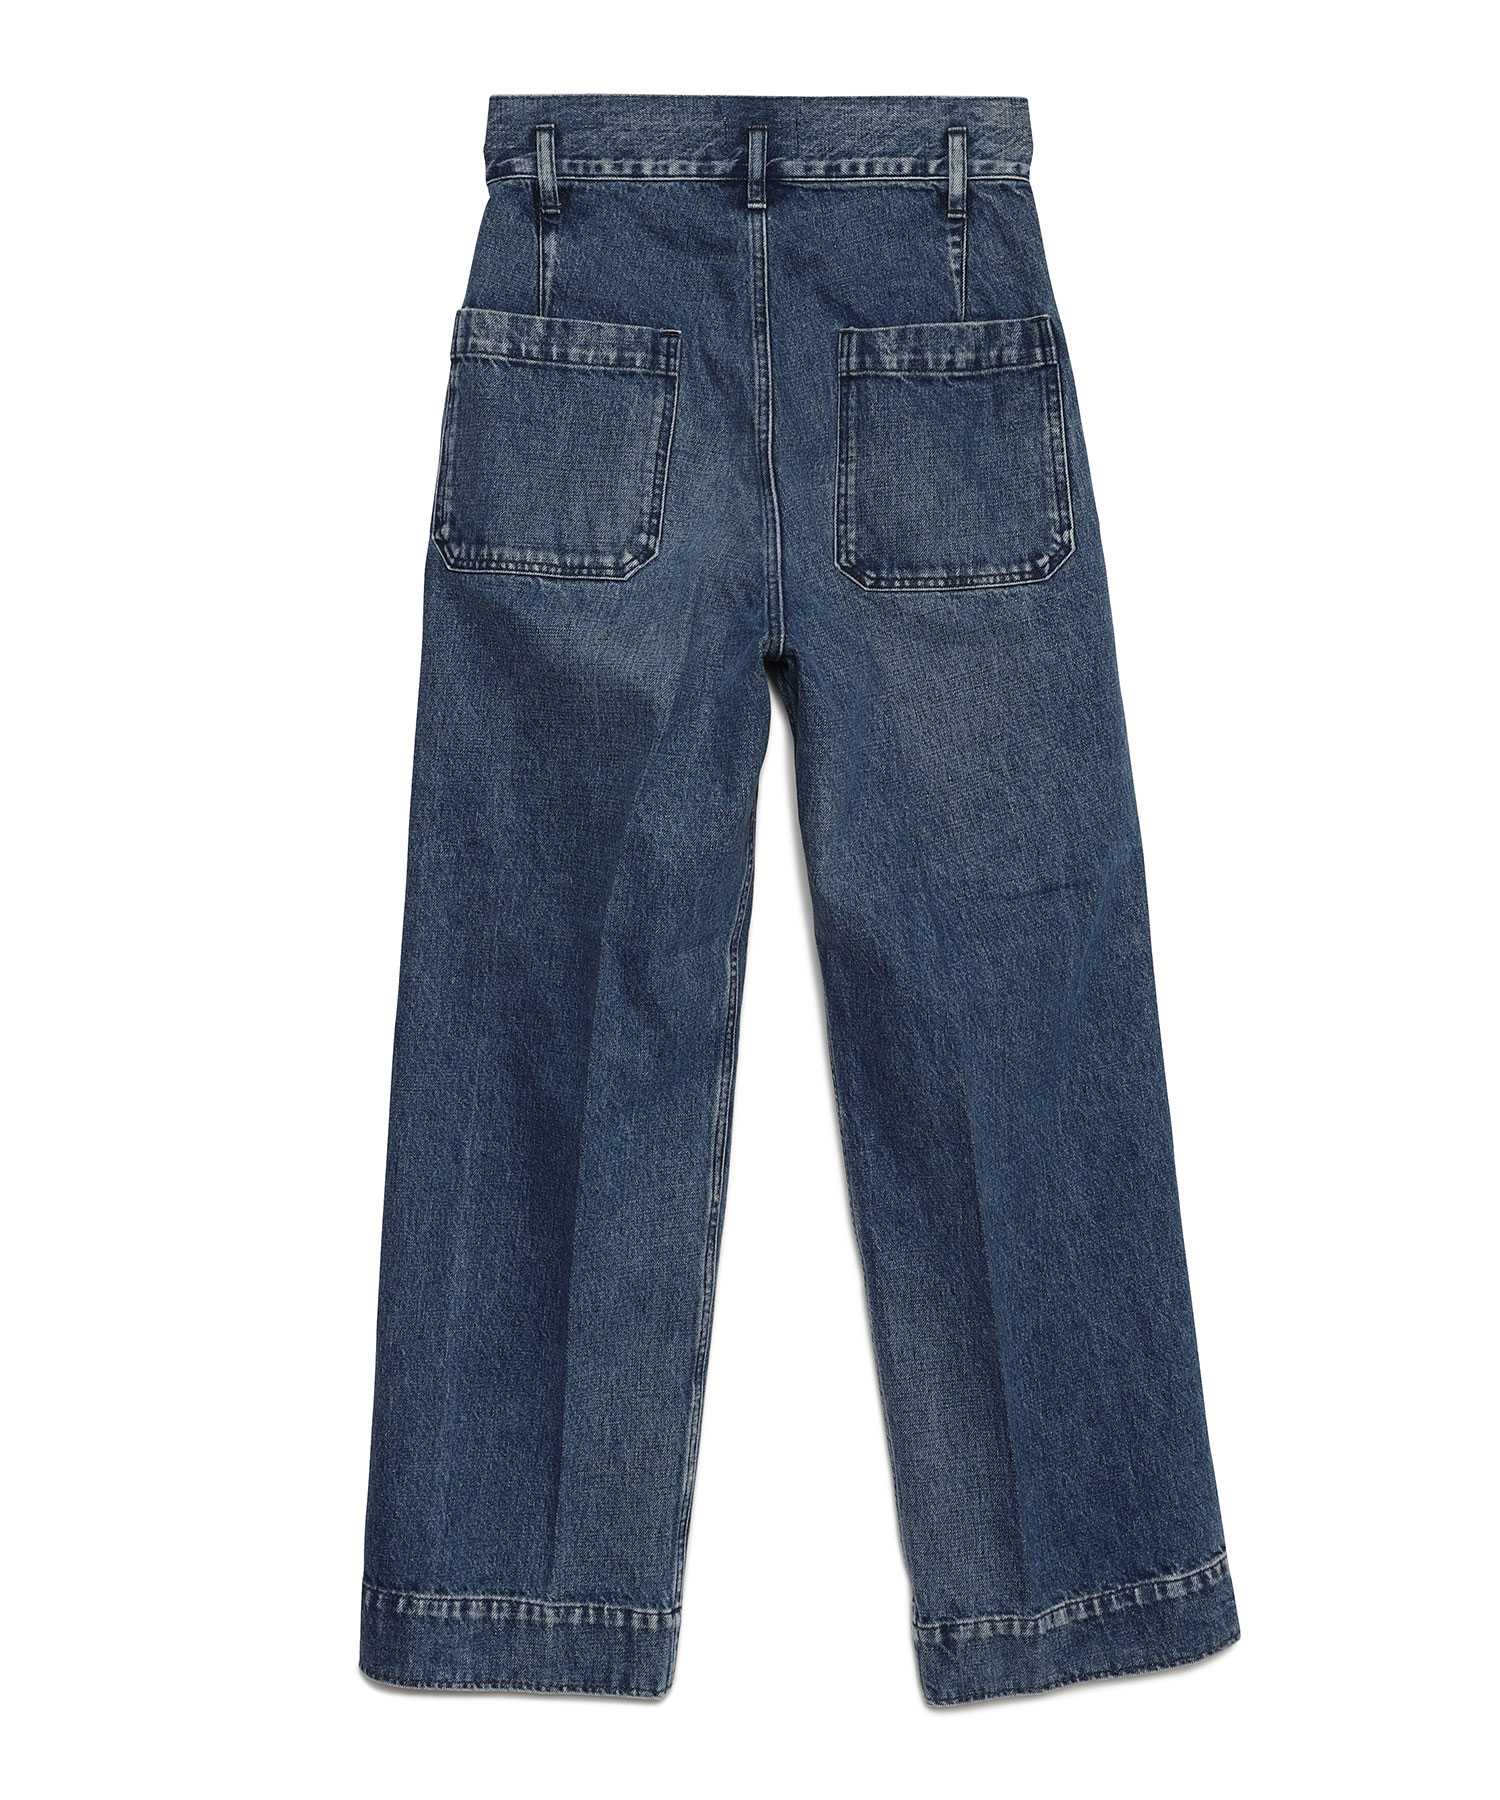 THE WIDE JEAN TROUSERS（TANAKA）｜TATRAS CONCEPT STORE タトラス 